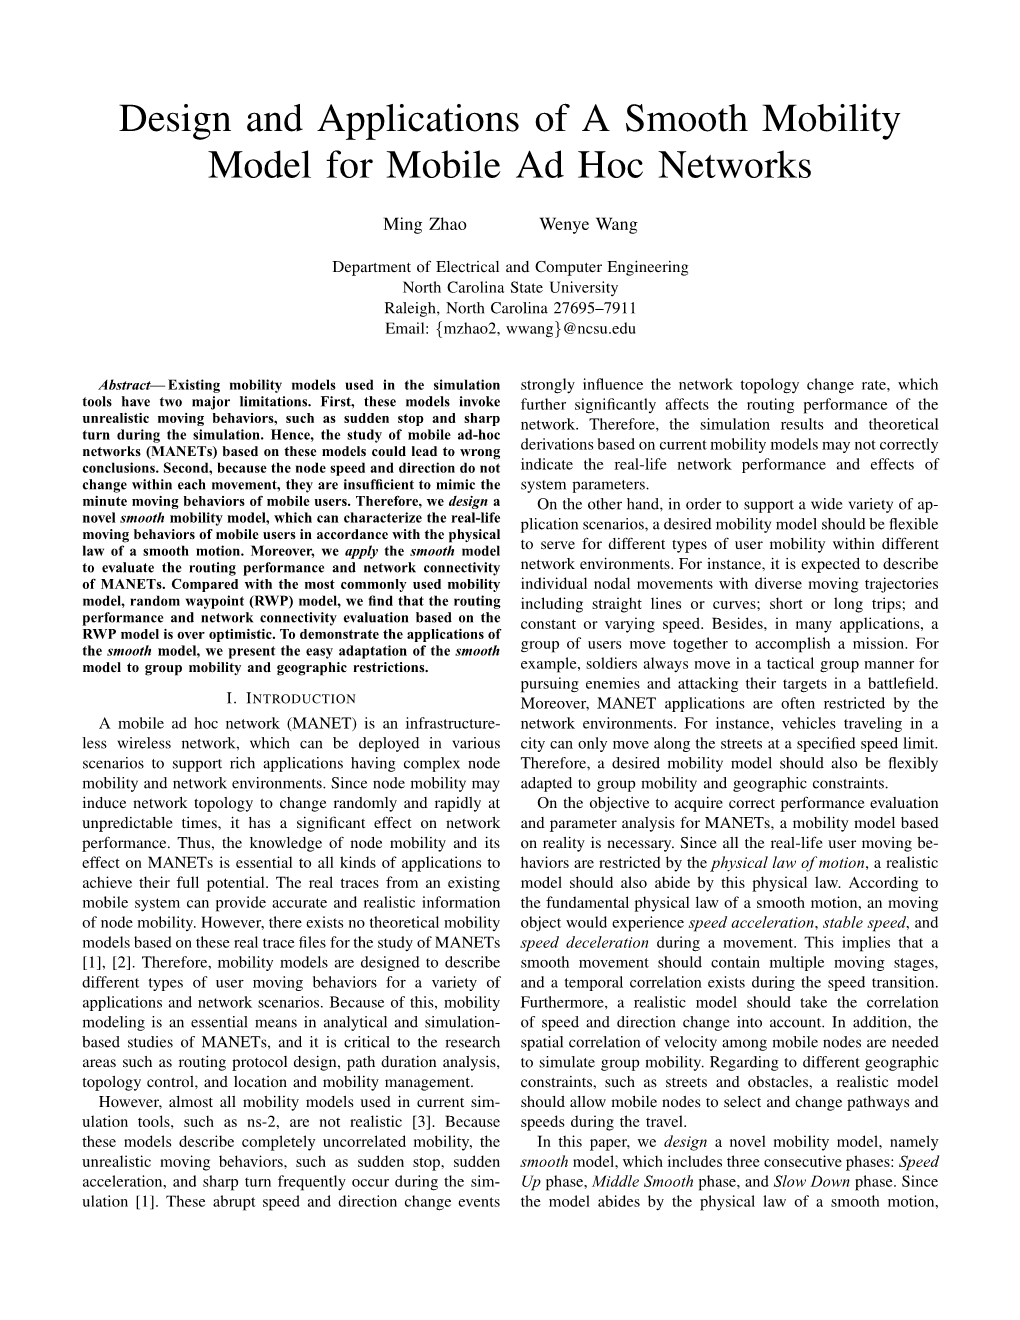 Design and Applications of a Smooth Mobility Model for Mobile Ad Hoc Networks